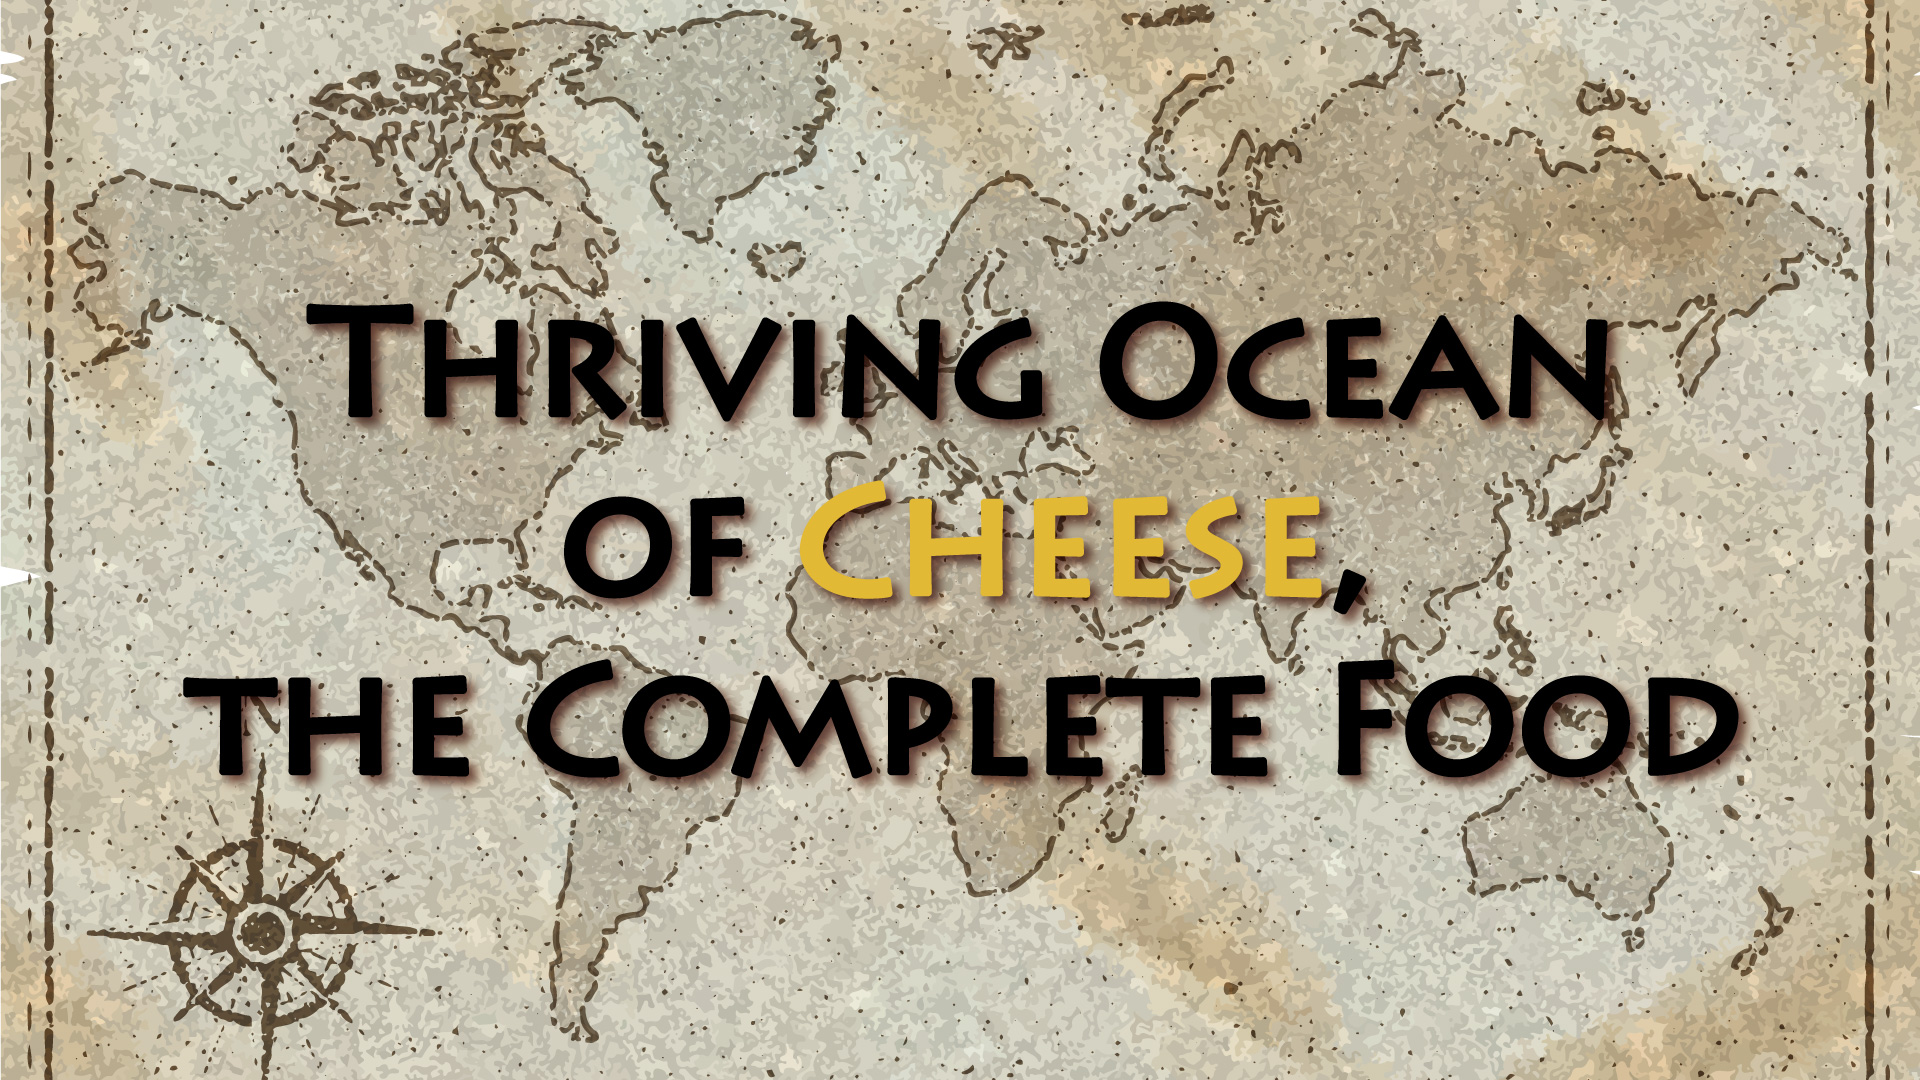 The sea of complete food cheese prosperity